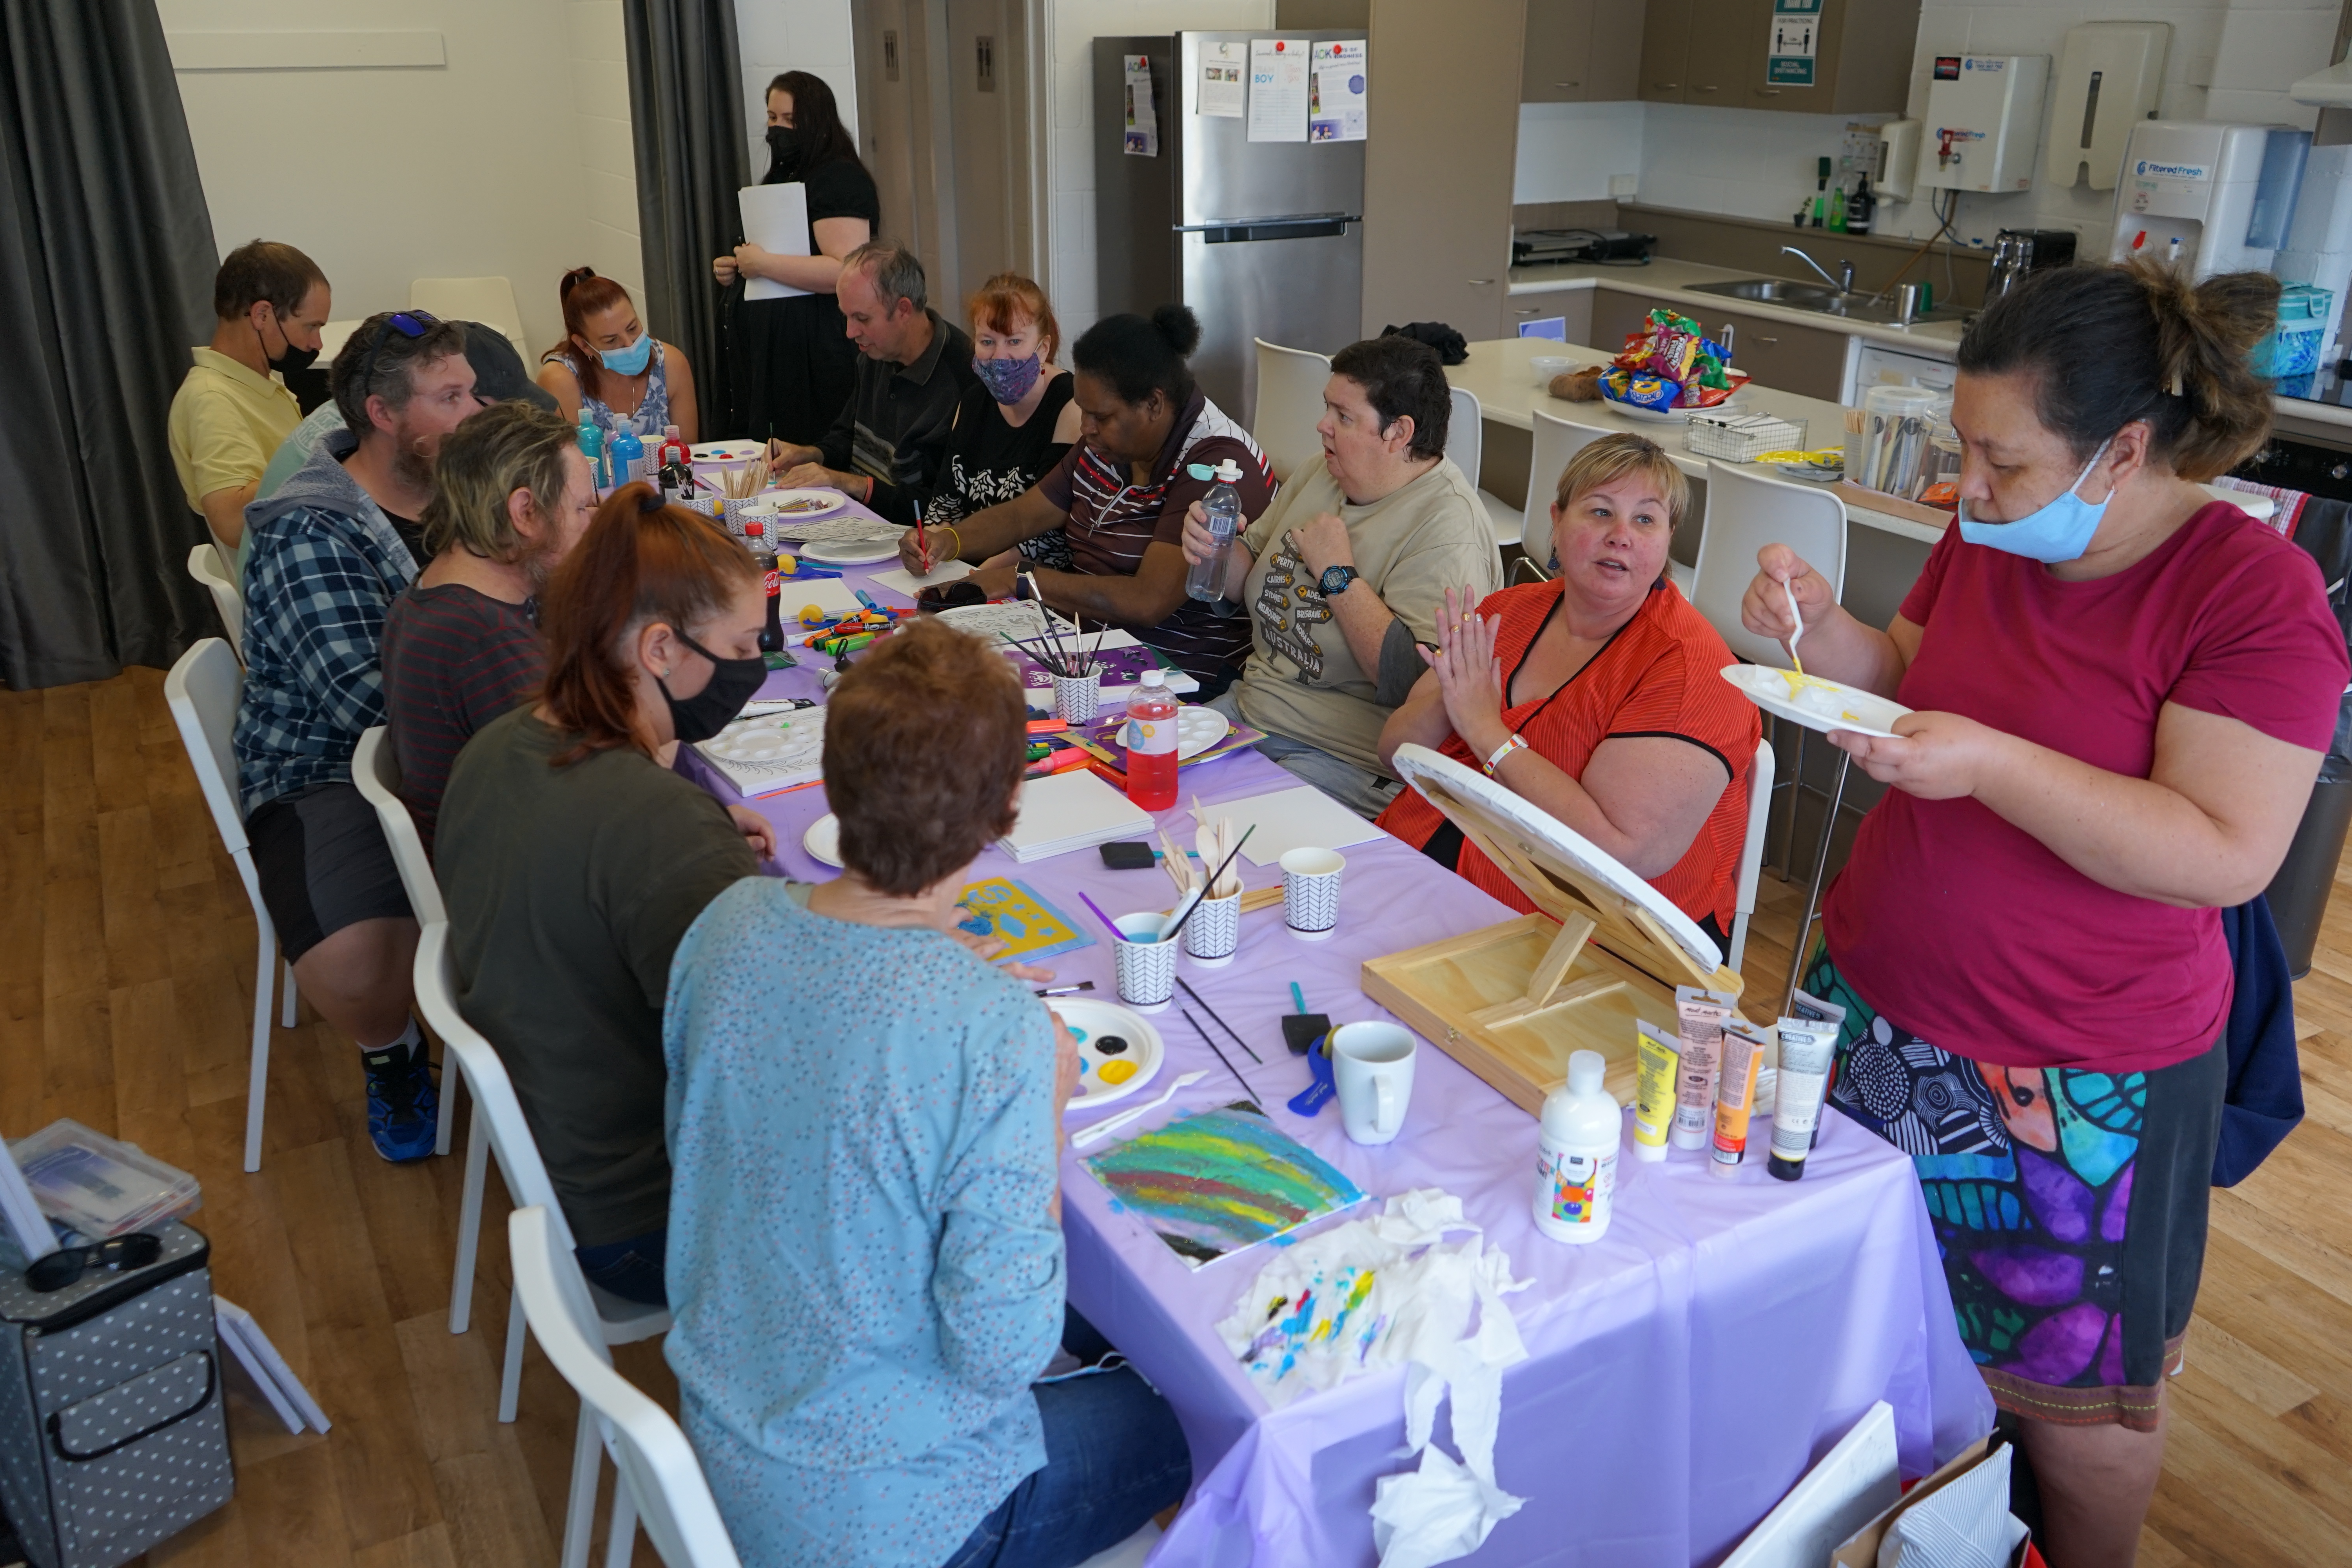 A group of people sit at a long table filled with painting equipment